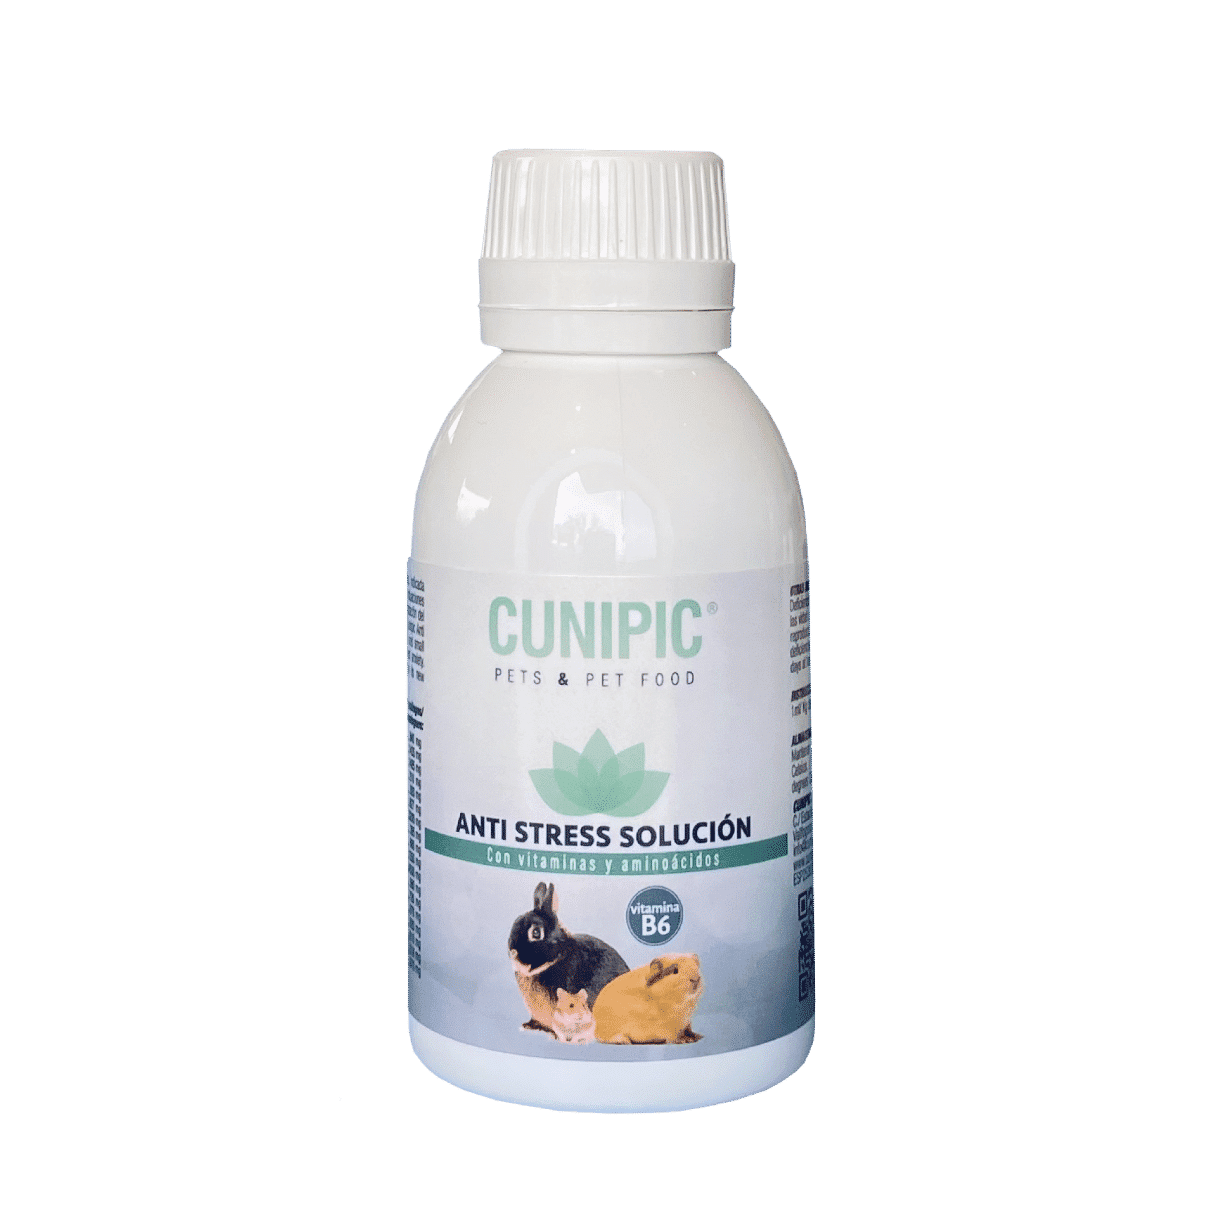 Cunipic antistress for rodents and rabbits